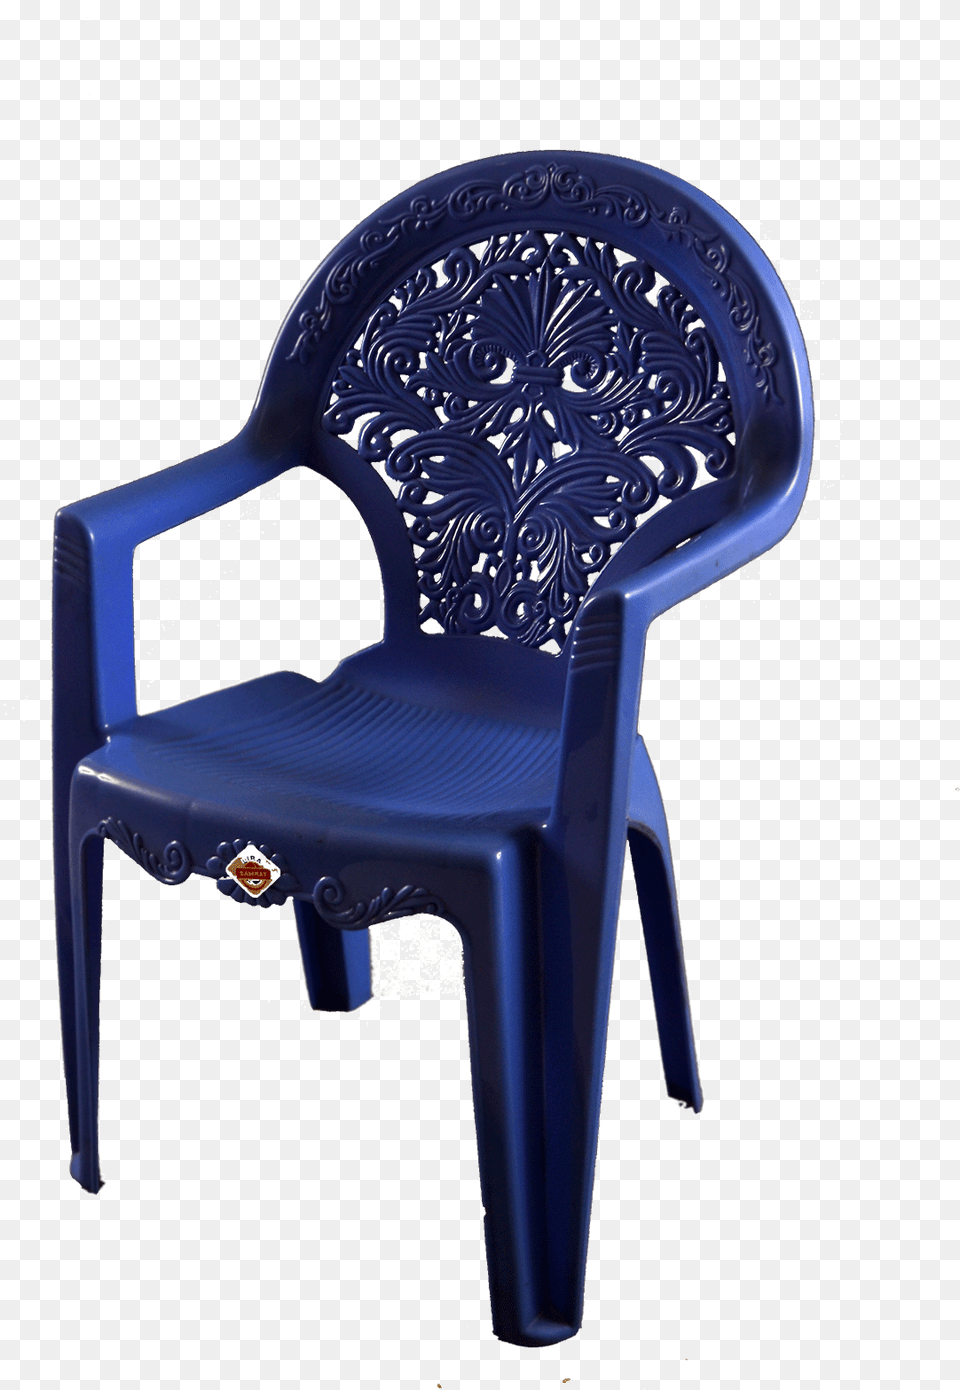 Baby Chair Lira Baby Chair Lira Plastic Blue Chair Plastic, Furniture, Armchair Free Transparent Png